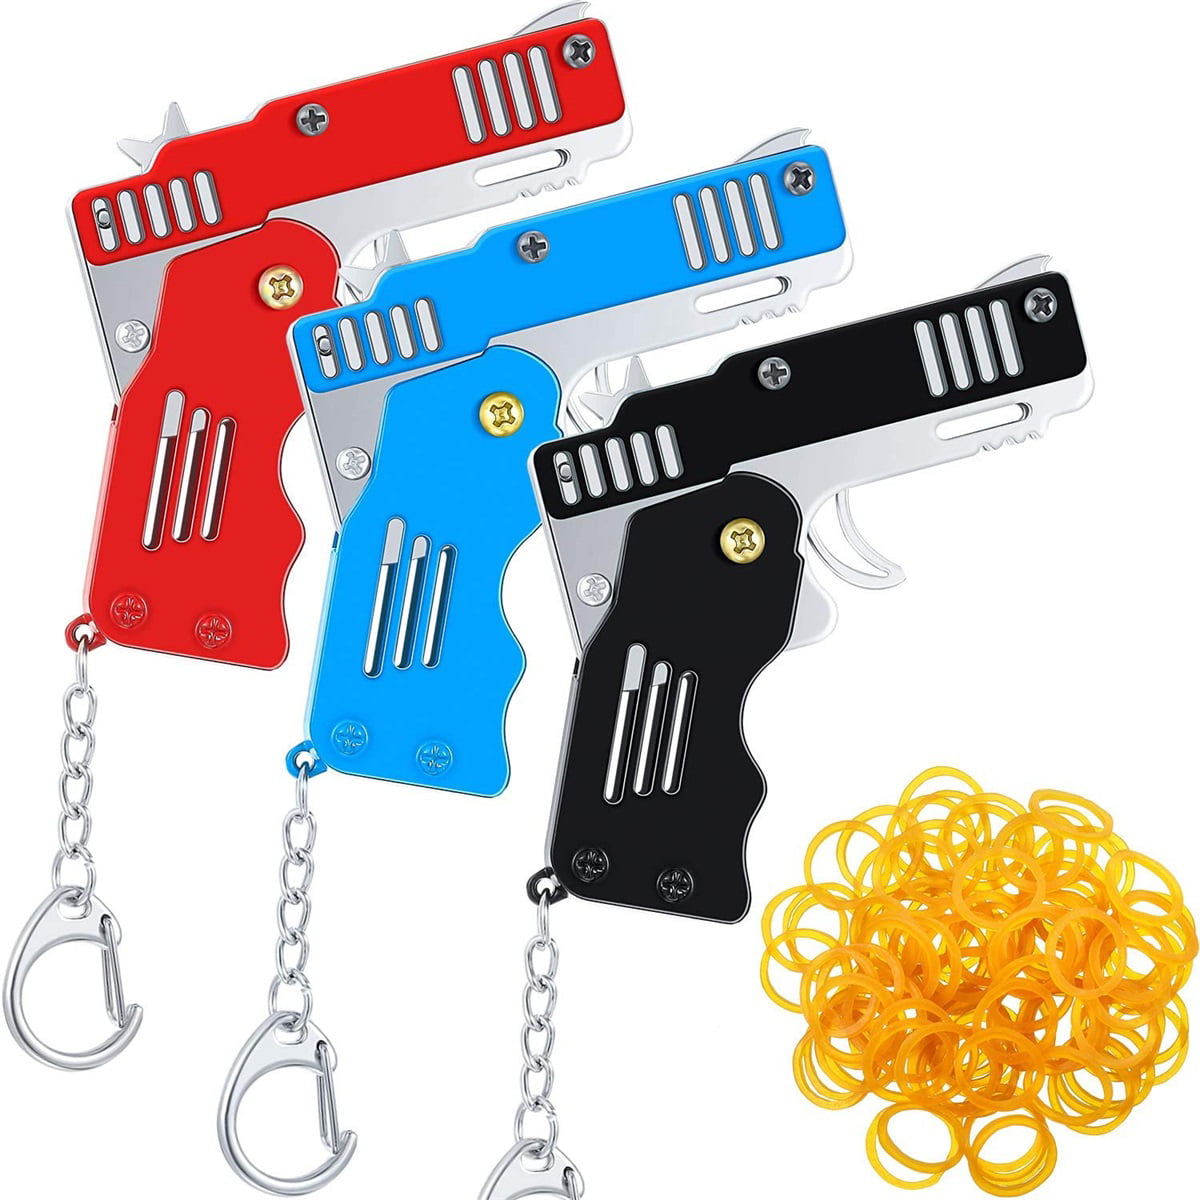 Details about   Rubber Band Gun Mini Metal Folding 6-Shot with Keychain 7 Colors